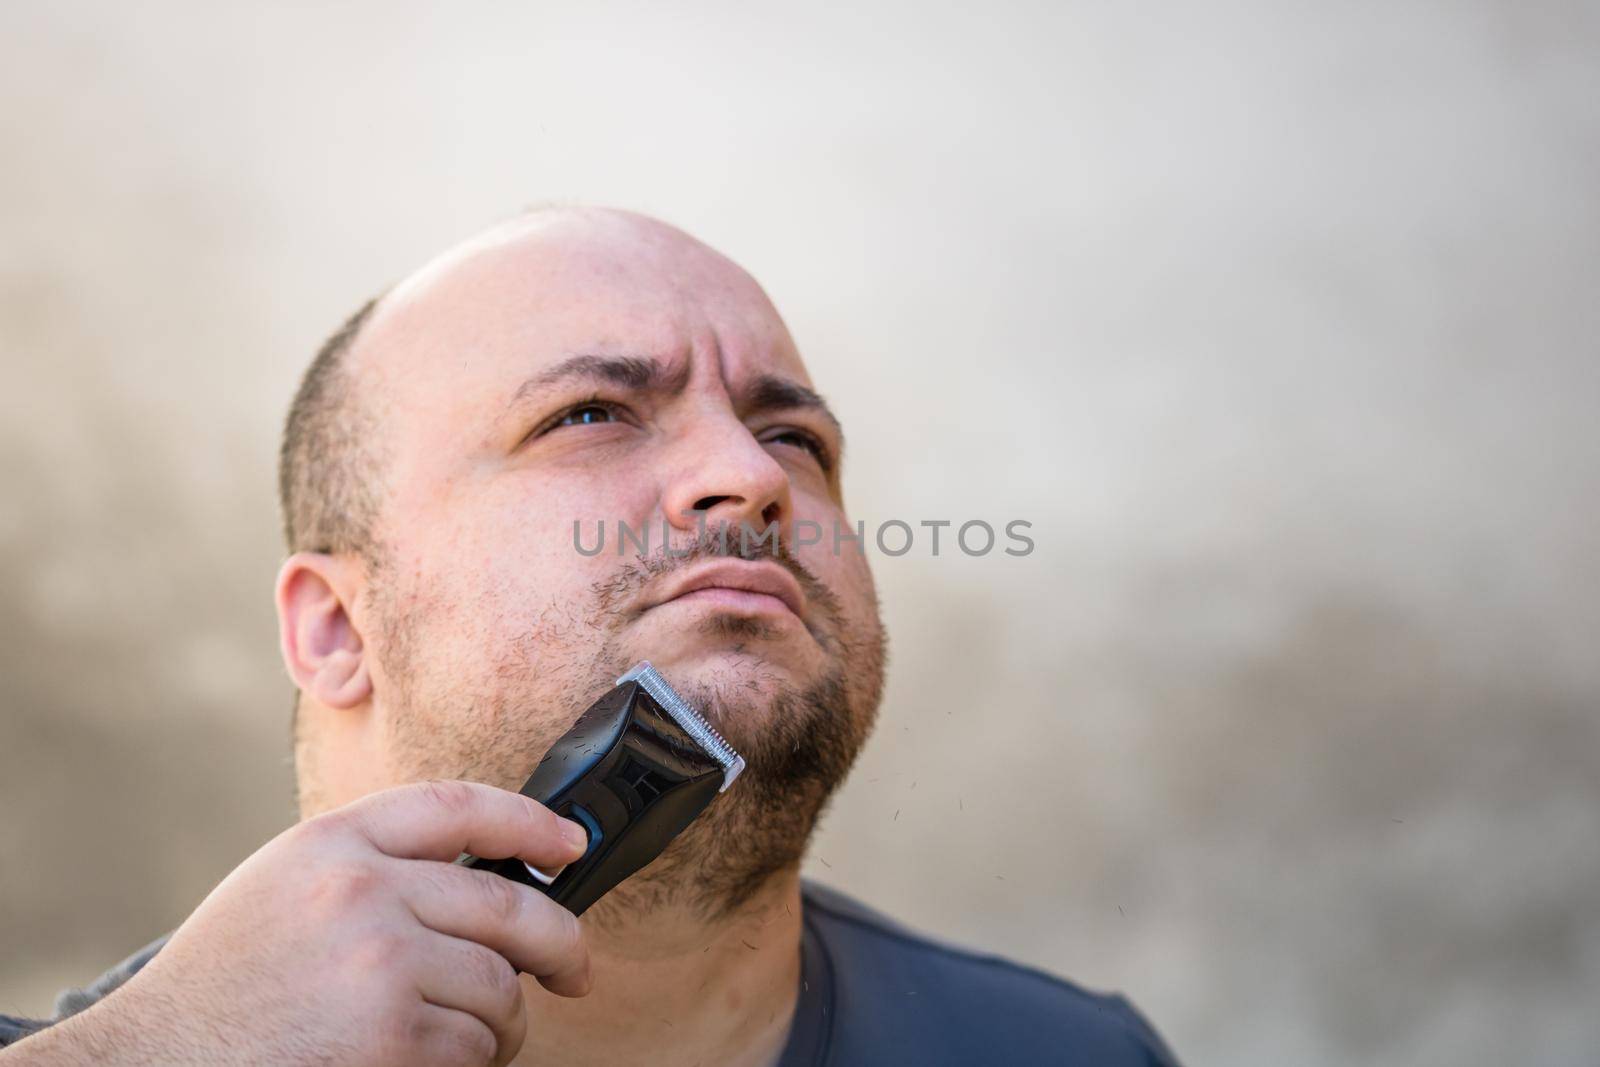 Male shaving or trimming his beard using a hair clipper or electric razor by vladispas